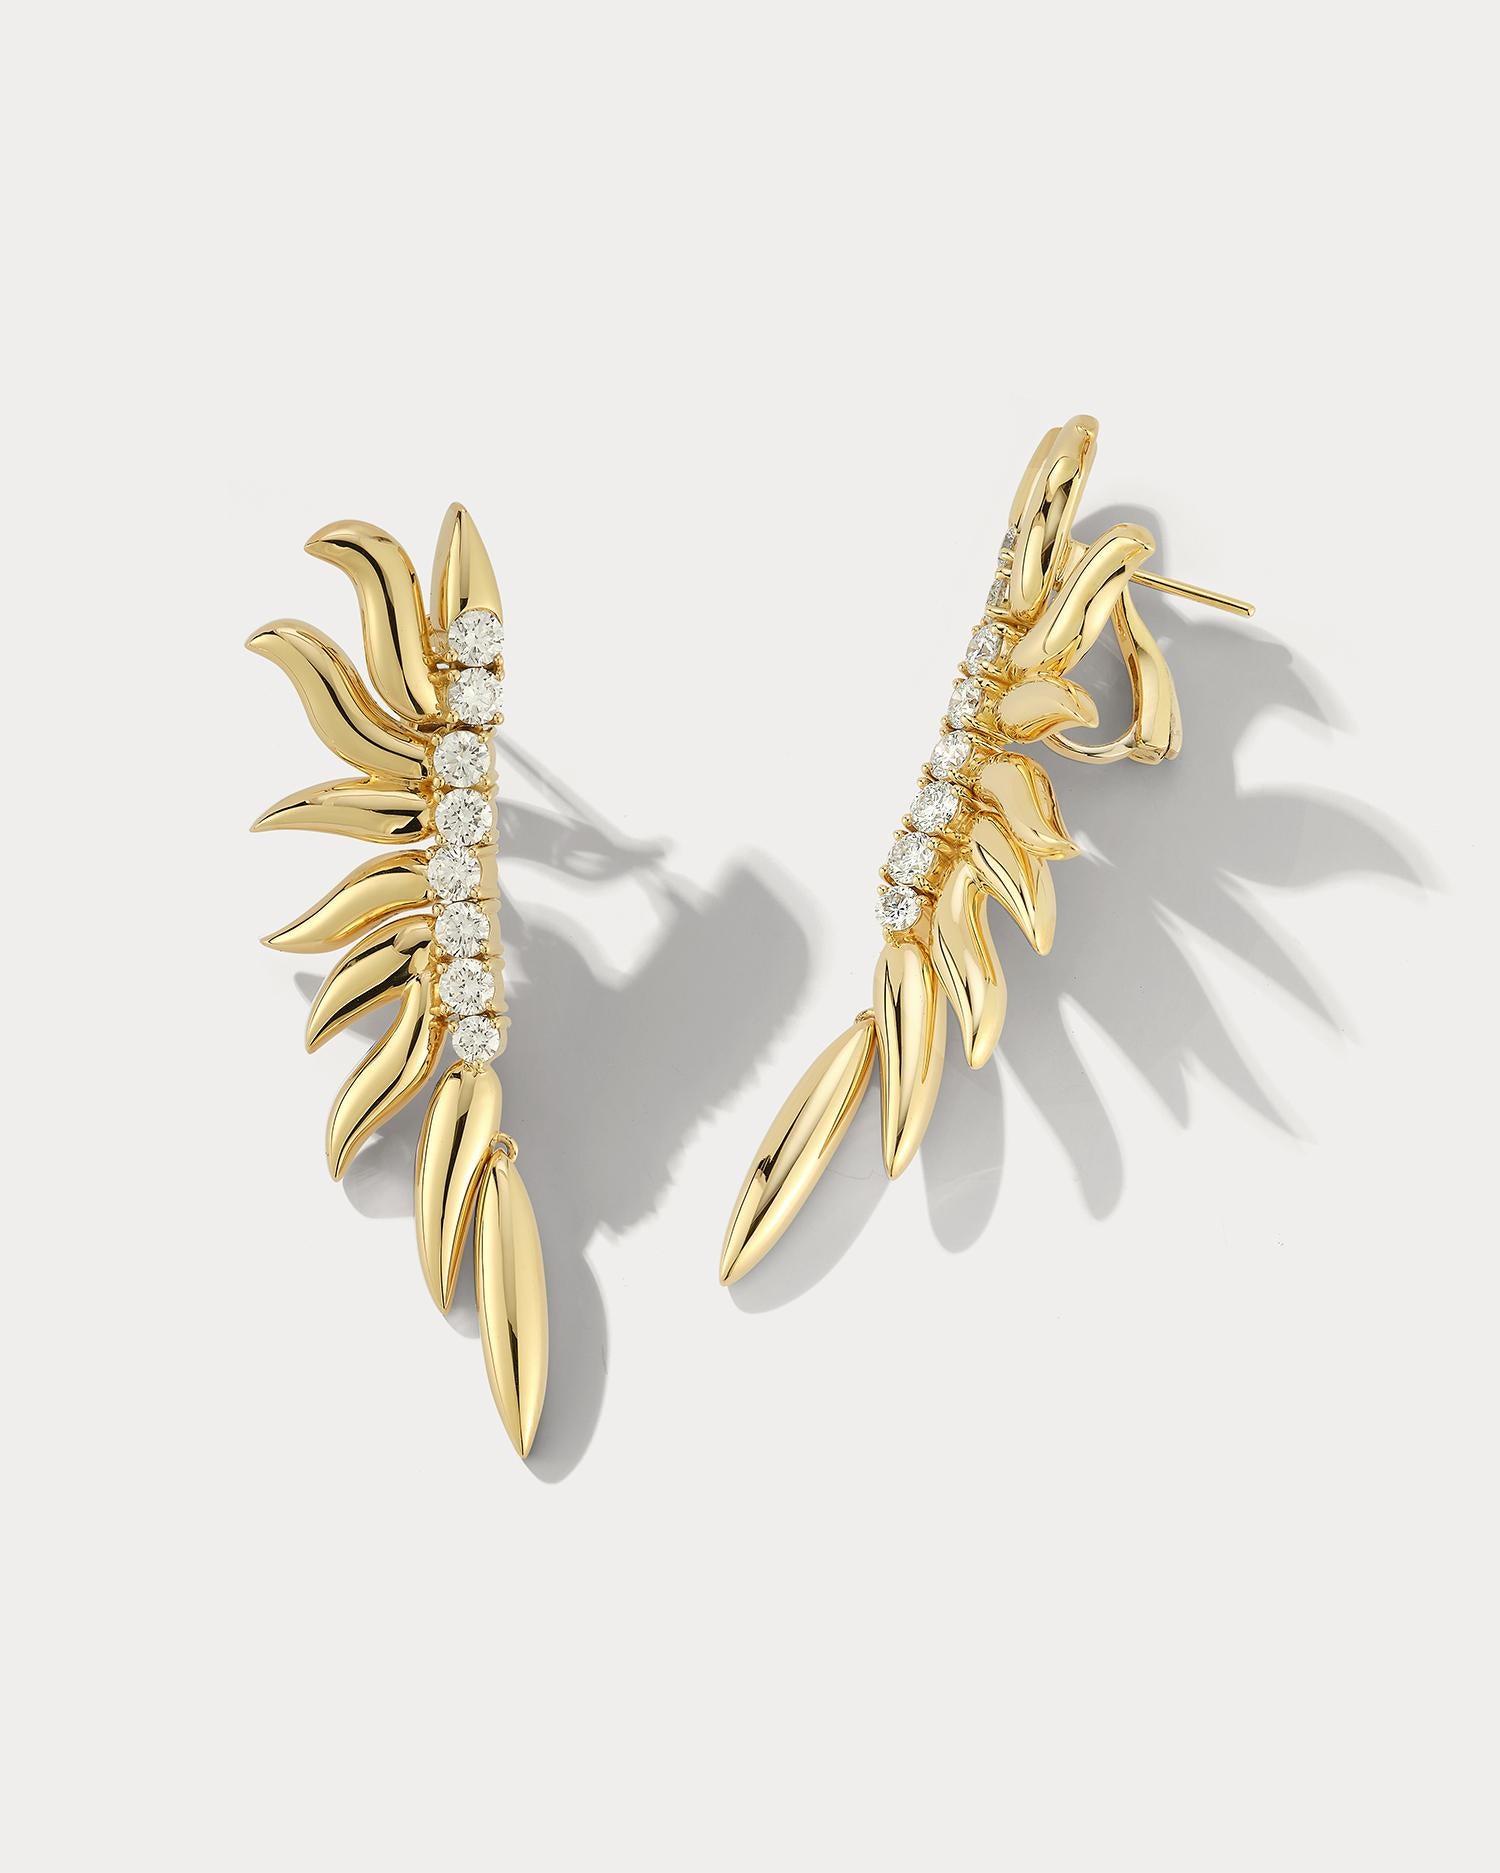 Flame Yellow Gold and Diamond Earrings are a luxurious and elegant pair of earrings designed to add a touch of sophistication to any outfit. They are crafted from high-quality 18k yellow gold, known for its durability and beautiful, warm color. They